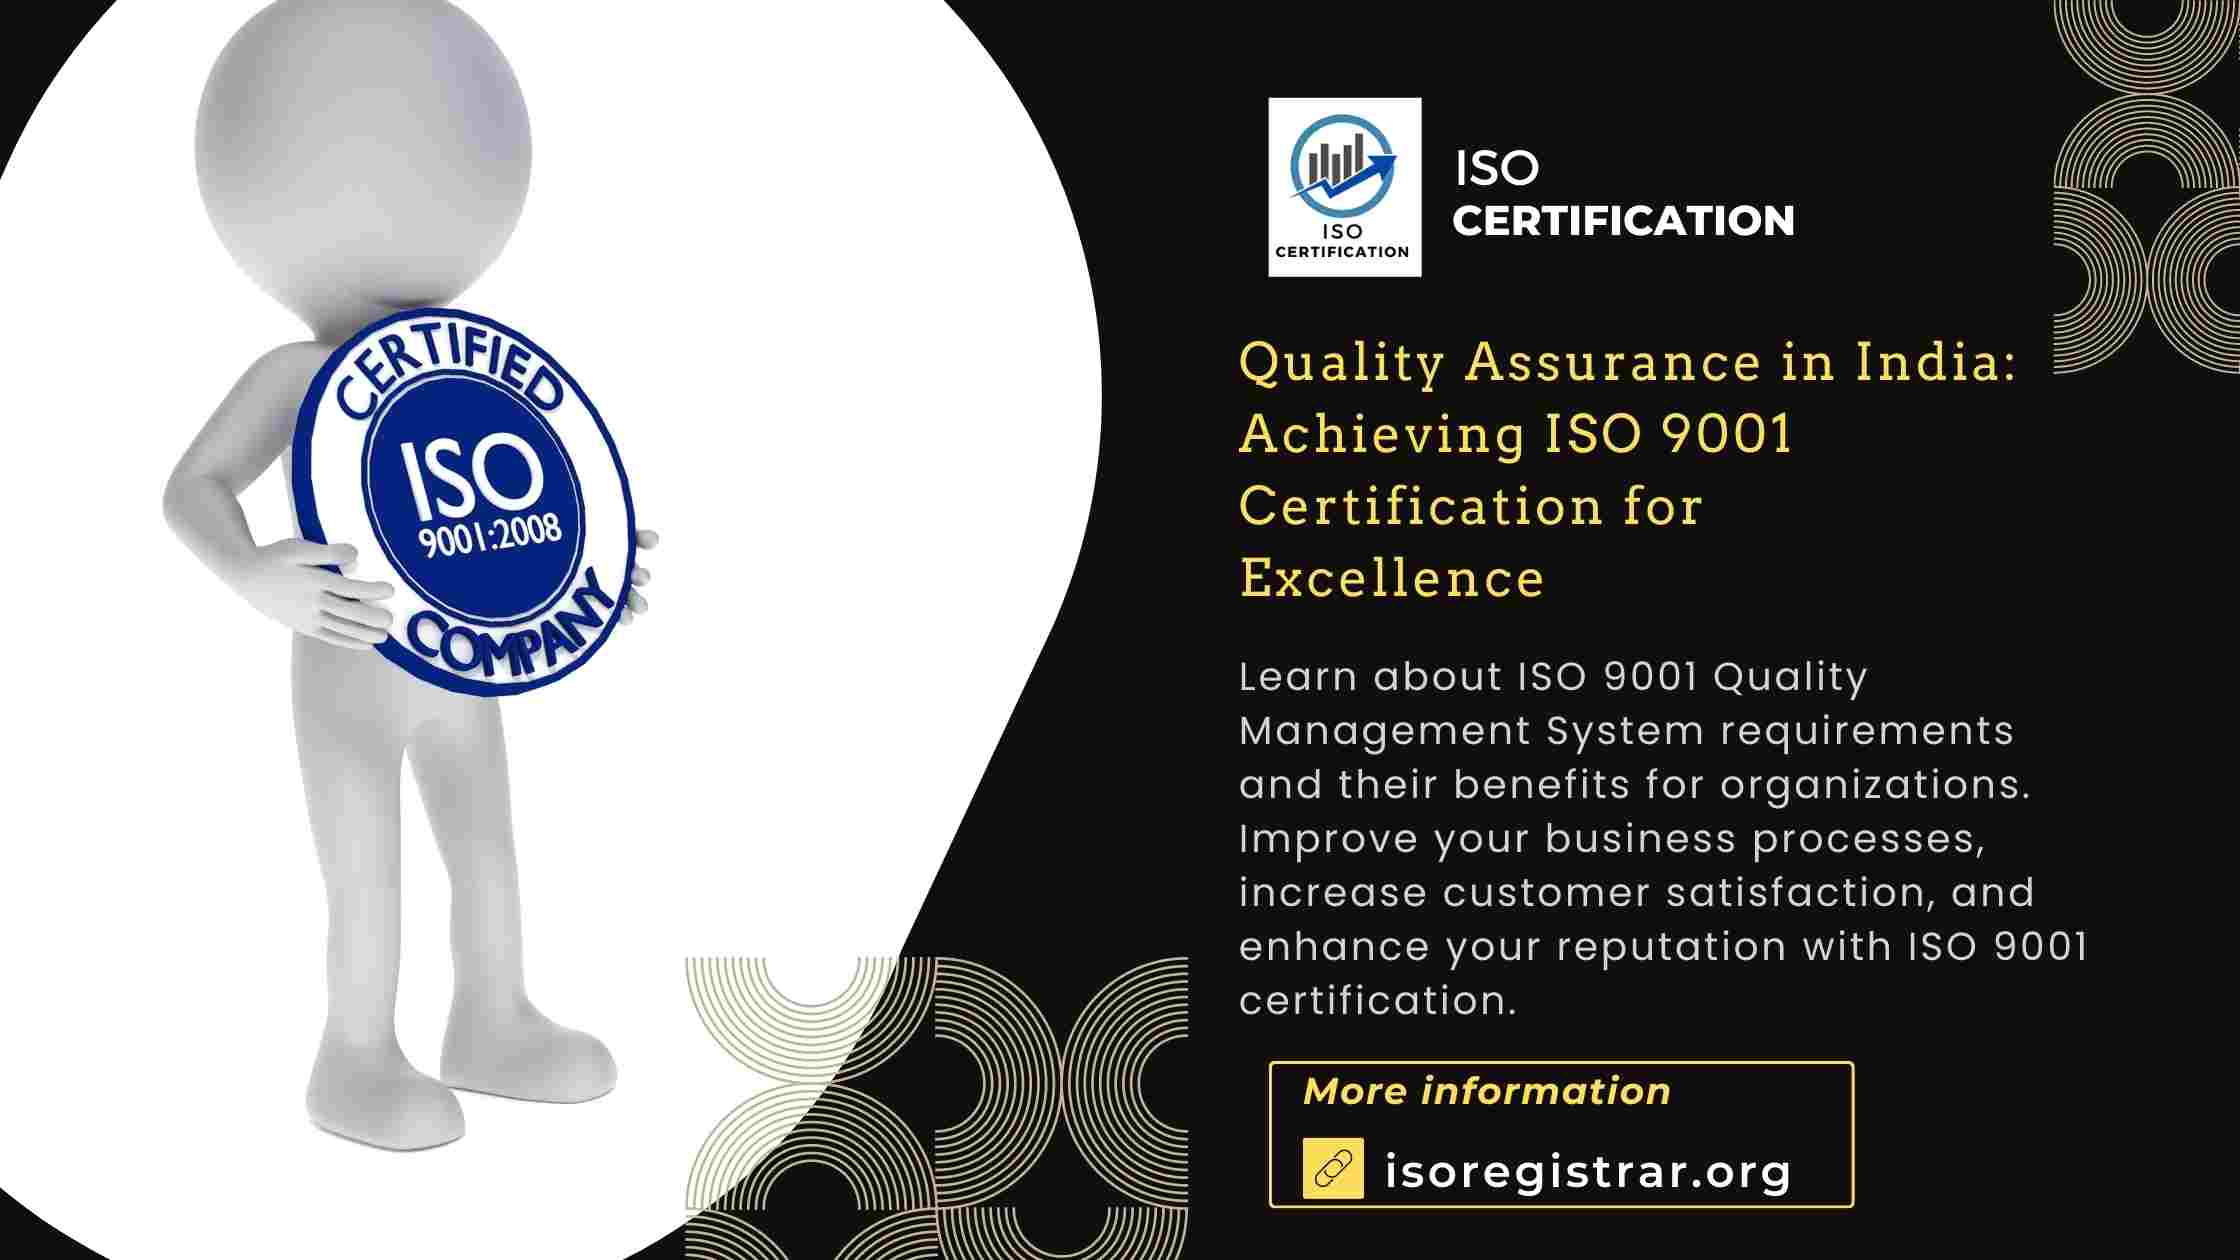 Quality Assurance in India: Achieving ISO 9001 Certification for Excellence